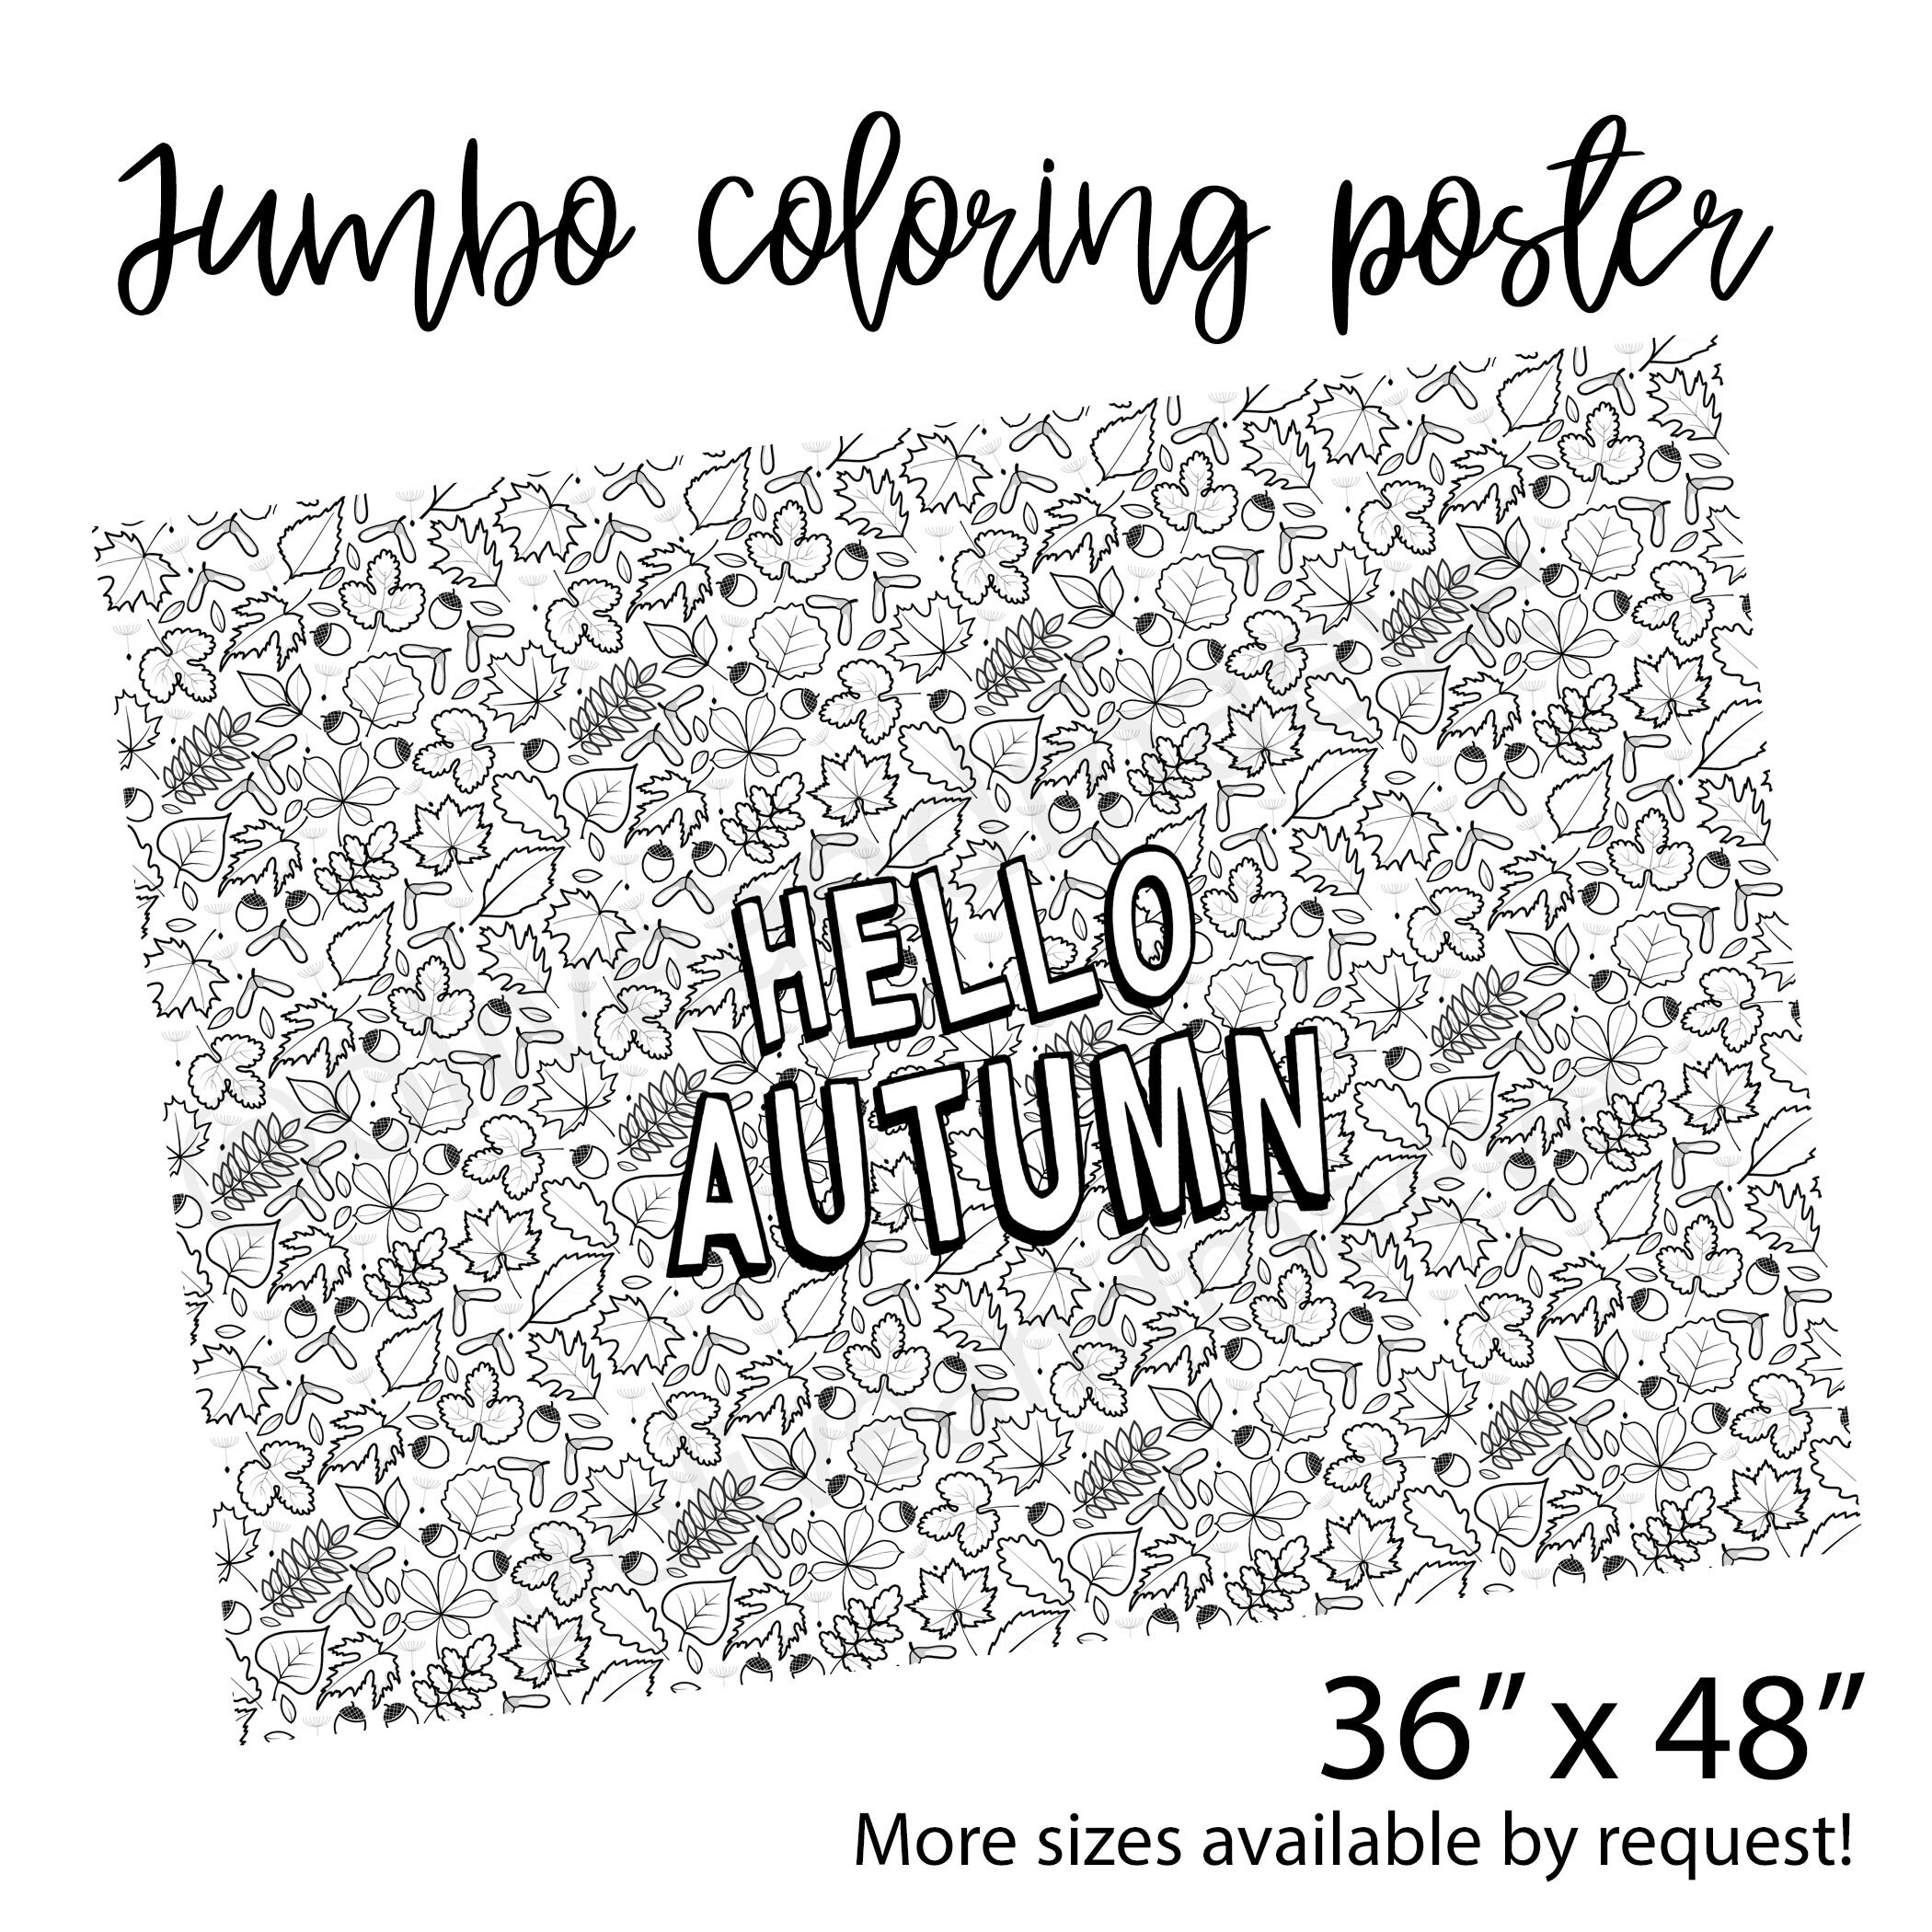 Qyeahkj Giant Fall Coloring Tablecloth for Kids Huge Autumn World Posters  Activity Large Color-in Paper Poster Table Cover for Kids Boys Girls